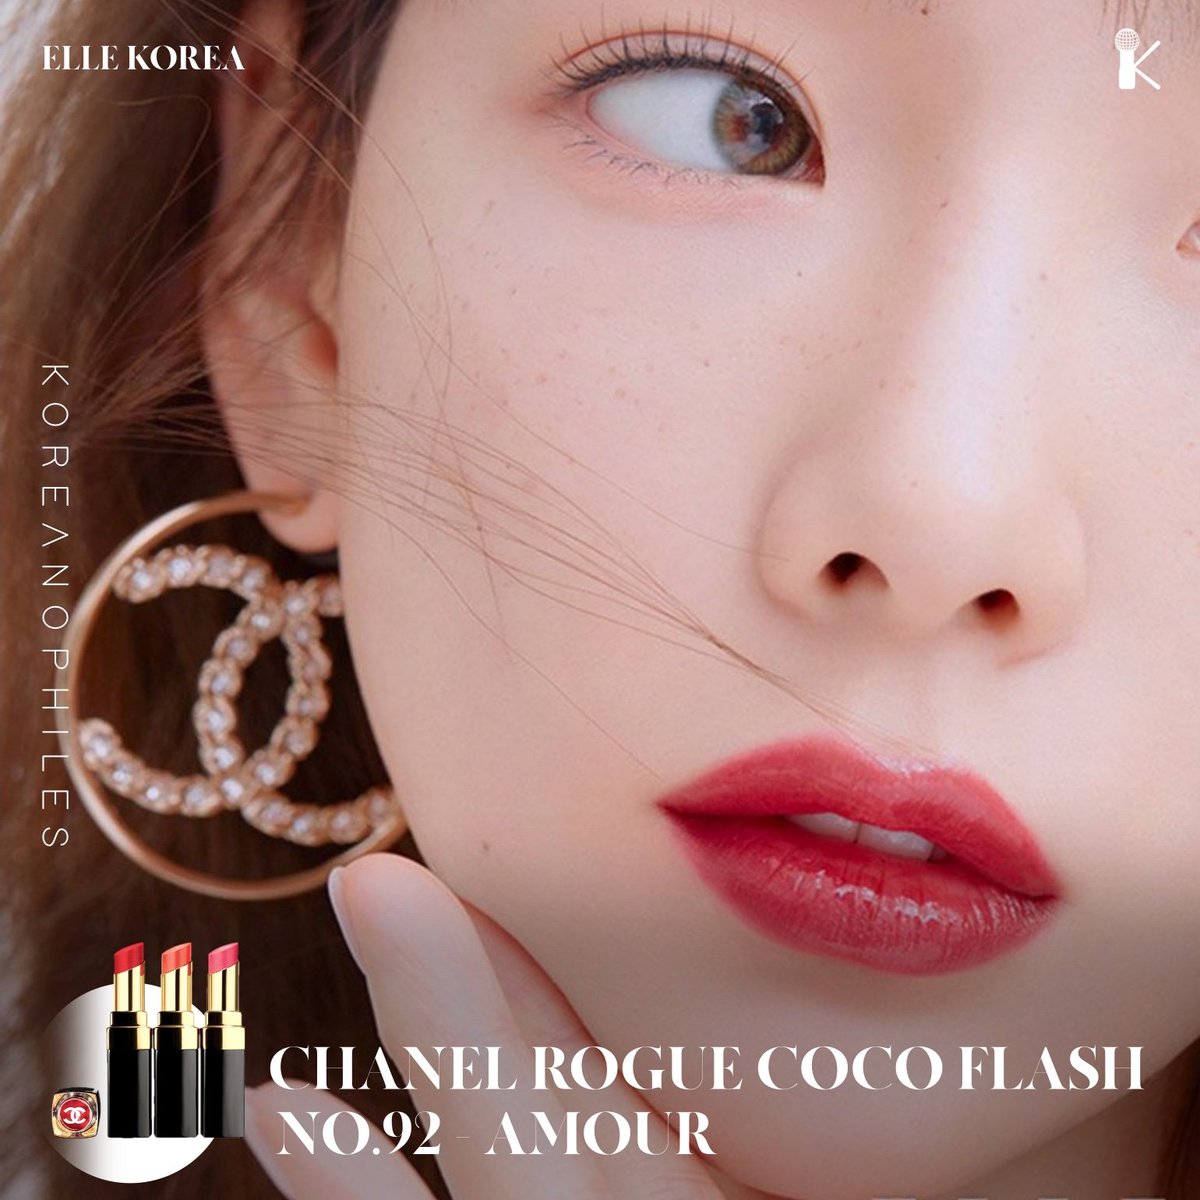 Chanel rouge coco flash ultimr｜TikTok Search